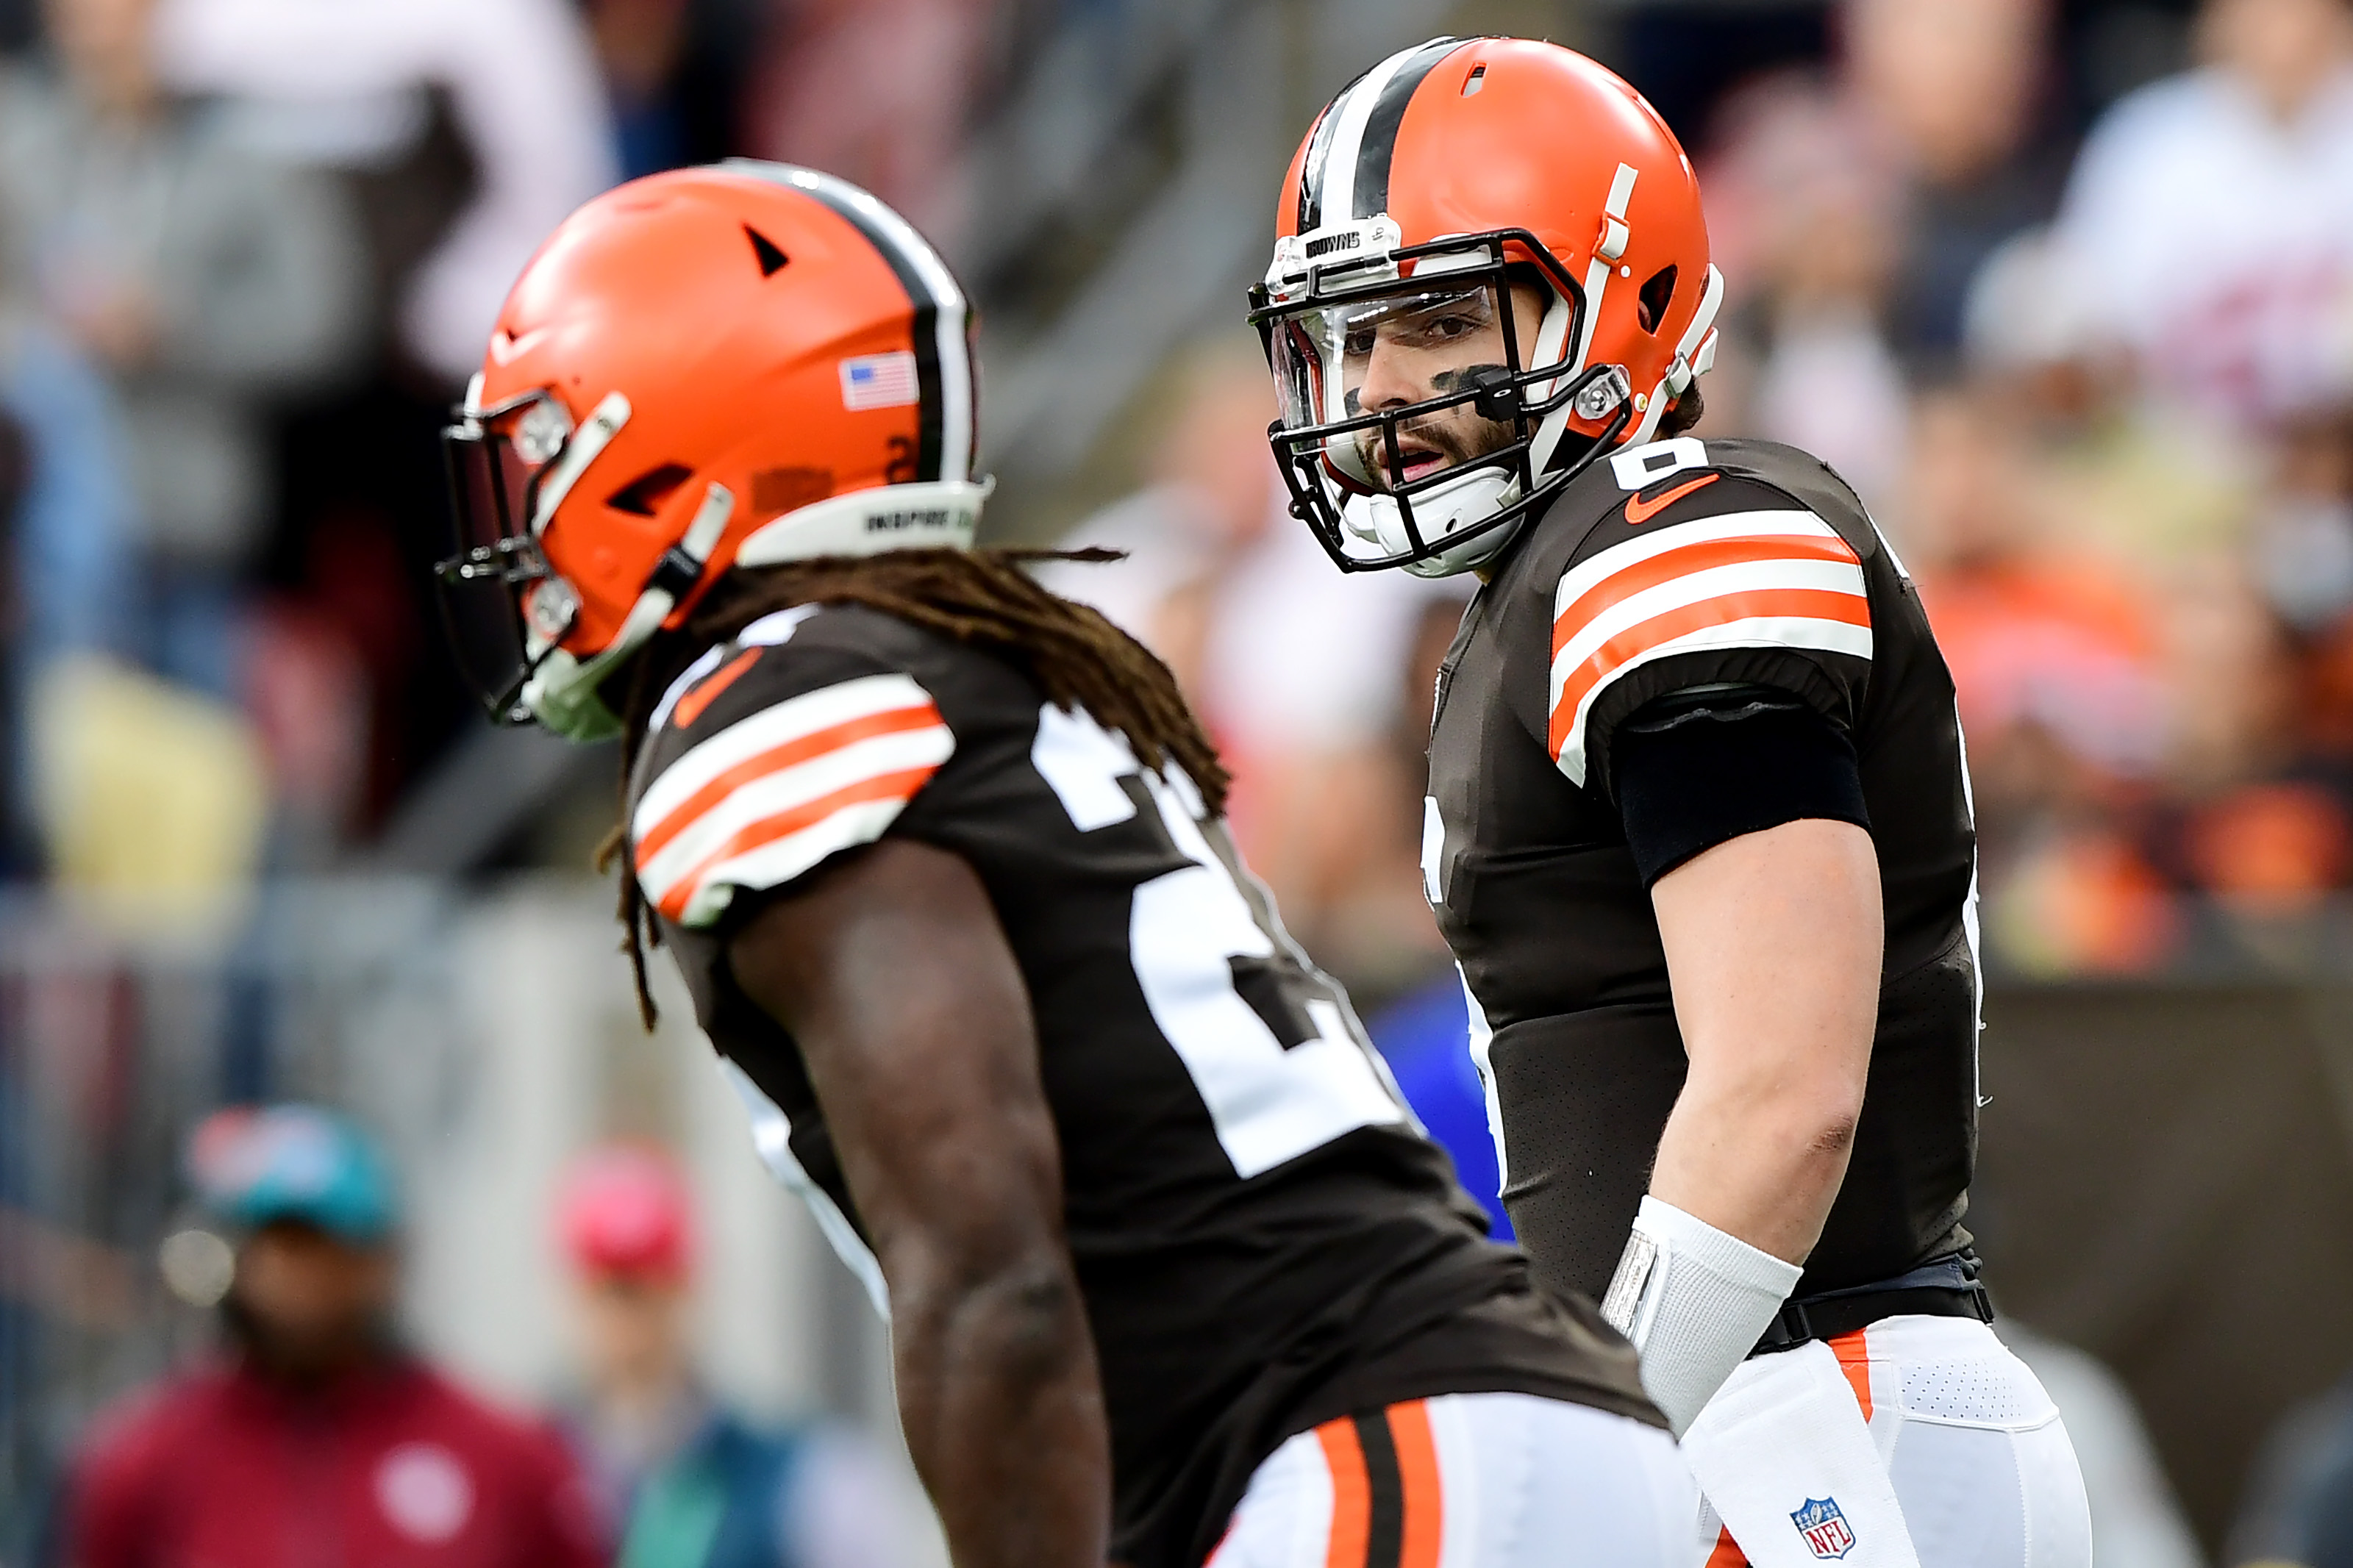 Browns QB Baker Mayfield looks at Kareem Hunt before a play